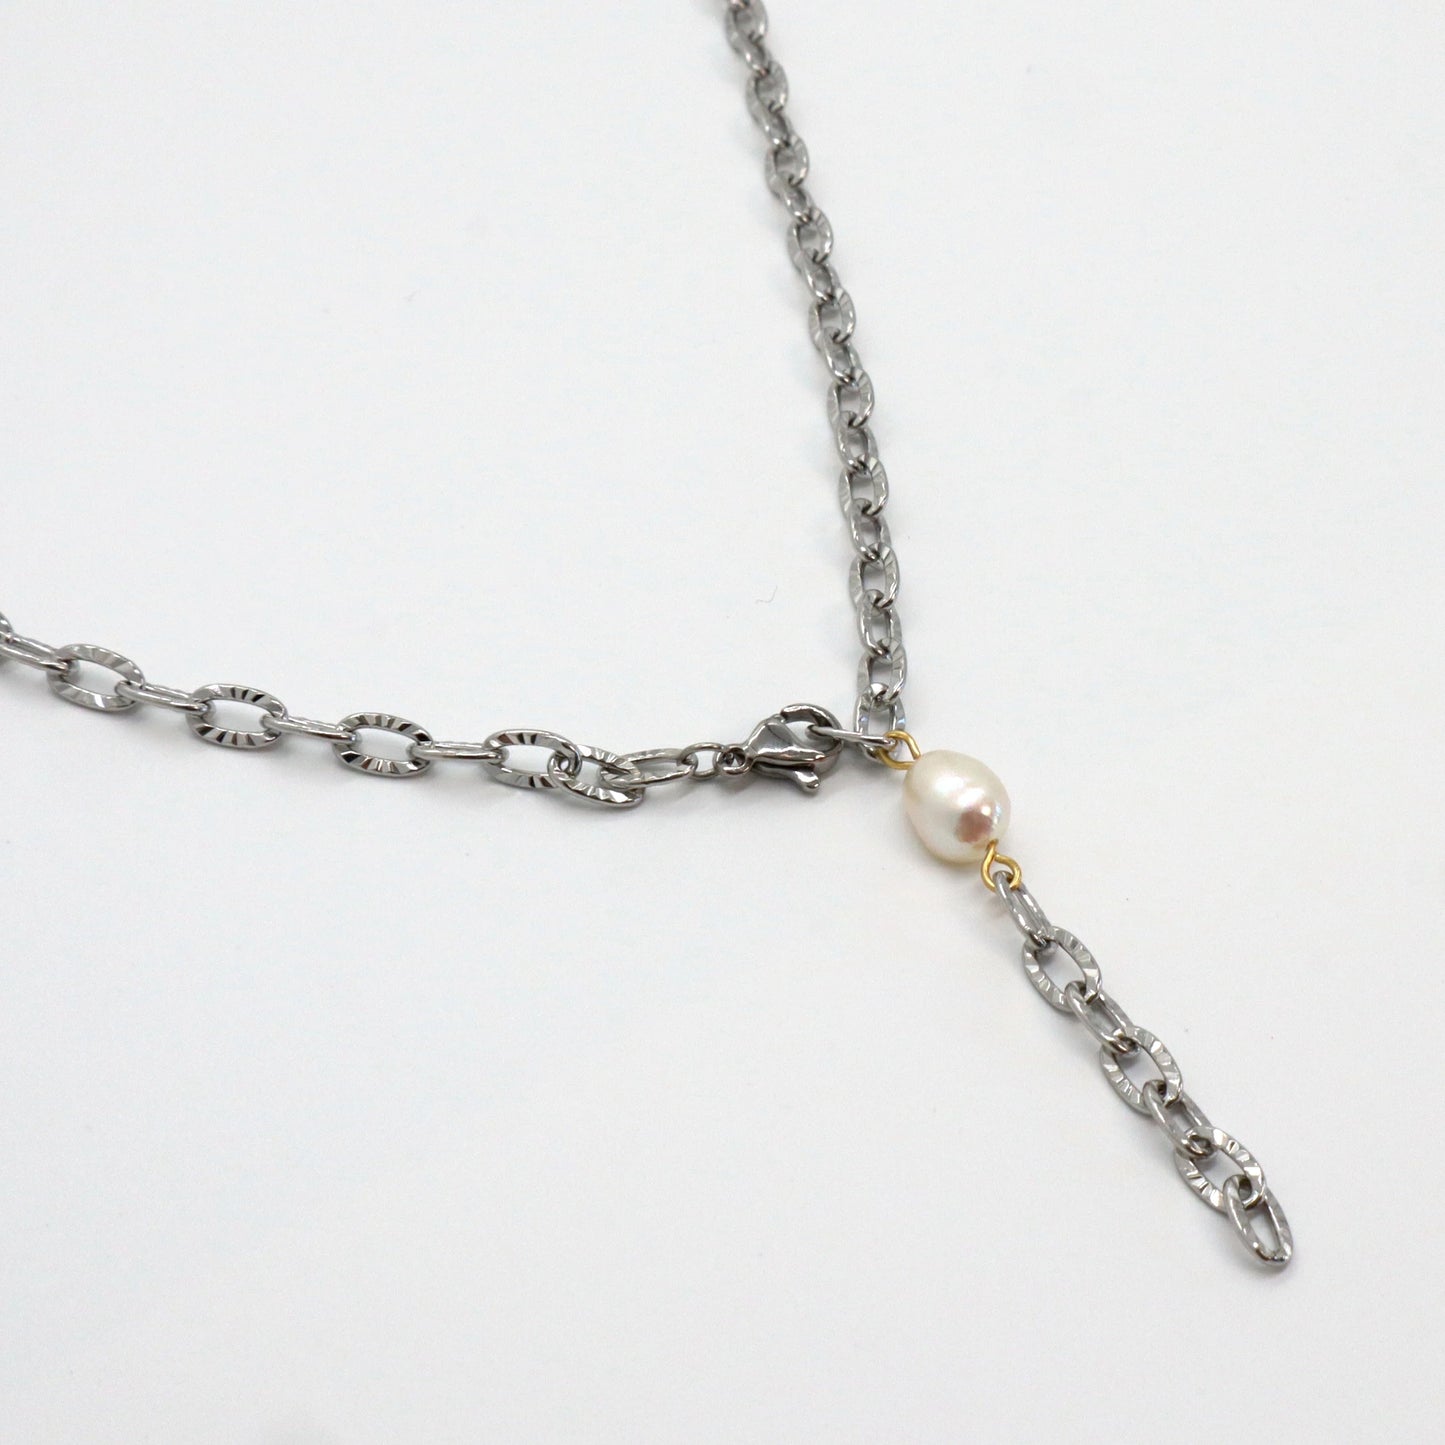 N092 stainless adjustfree cut chain necklace